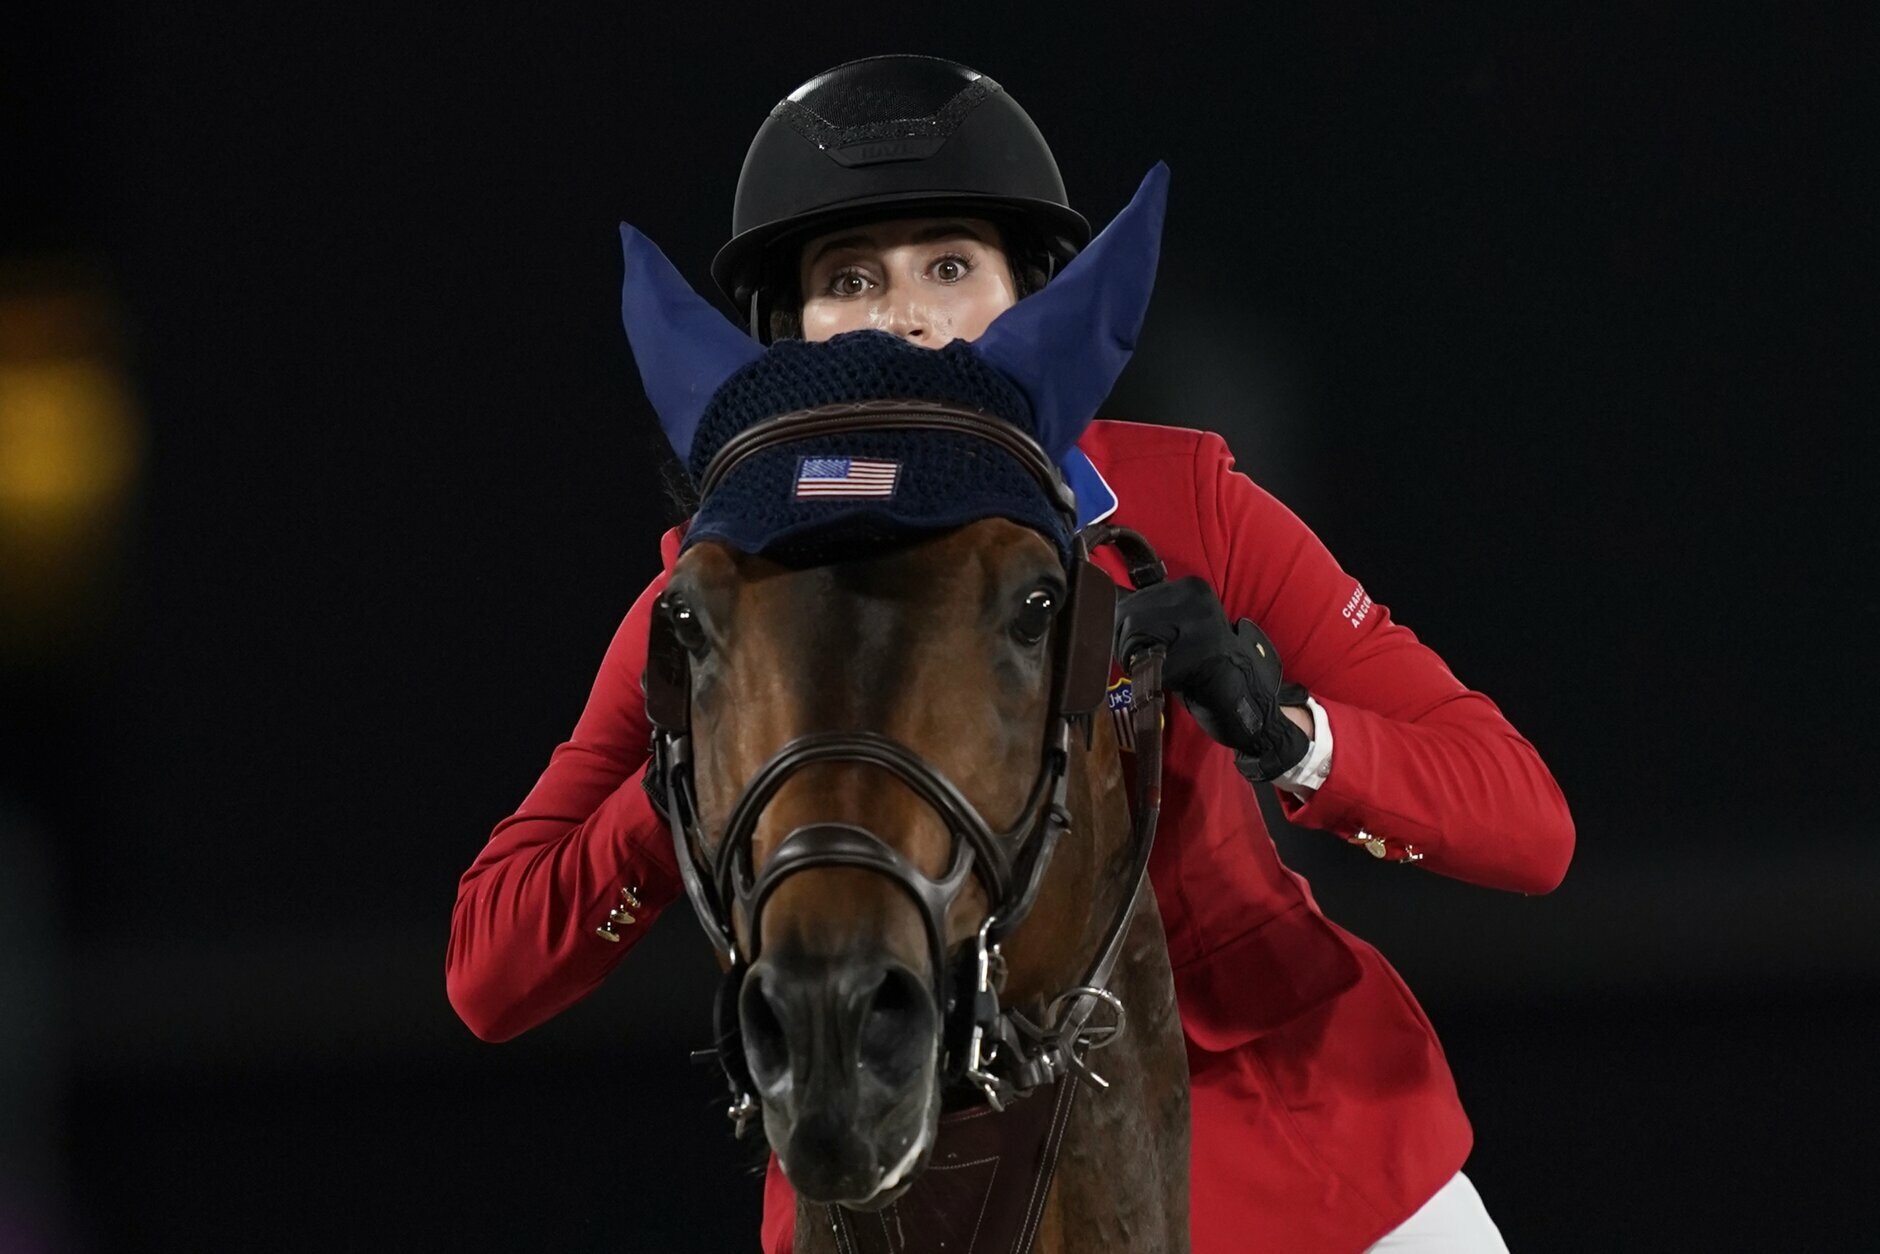 United States' Jessica Springsteen, riding Don Juan van de Donkhoeve, competes during the equestrian jumping team qualifying at Equestrian Park in Tokyo at the 2020 Summer Olympics, Friday, Aug. 6, 2021, in Tokyo, Japan. (AP Photo/Carolyn Kaster)